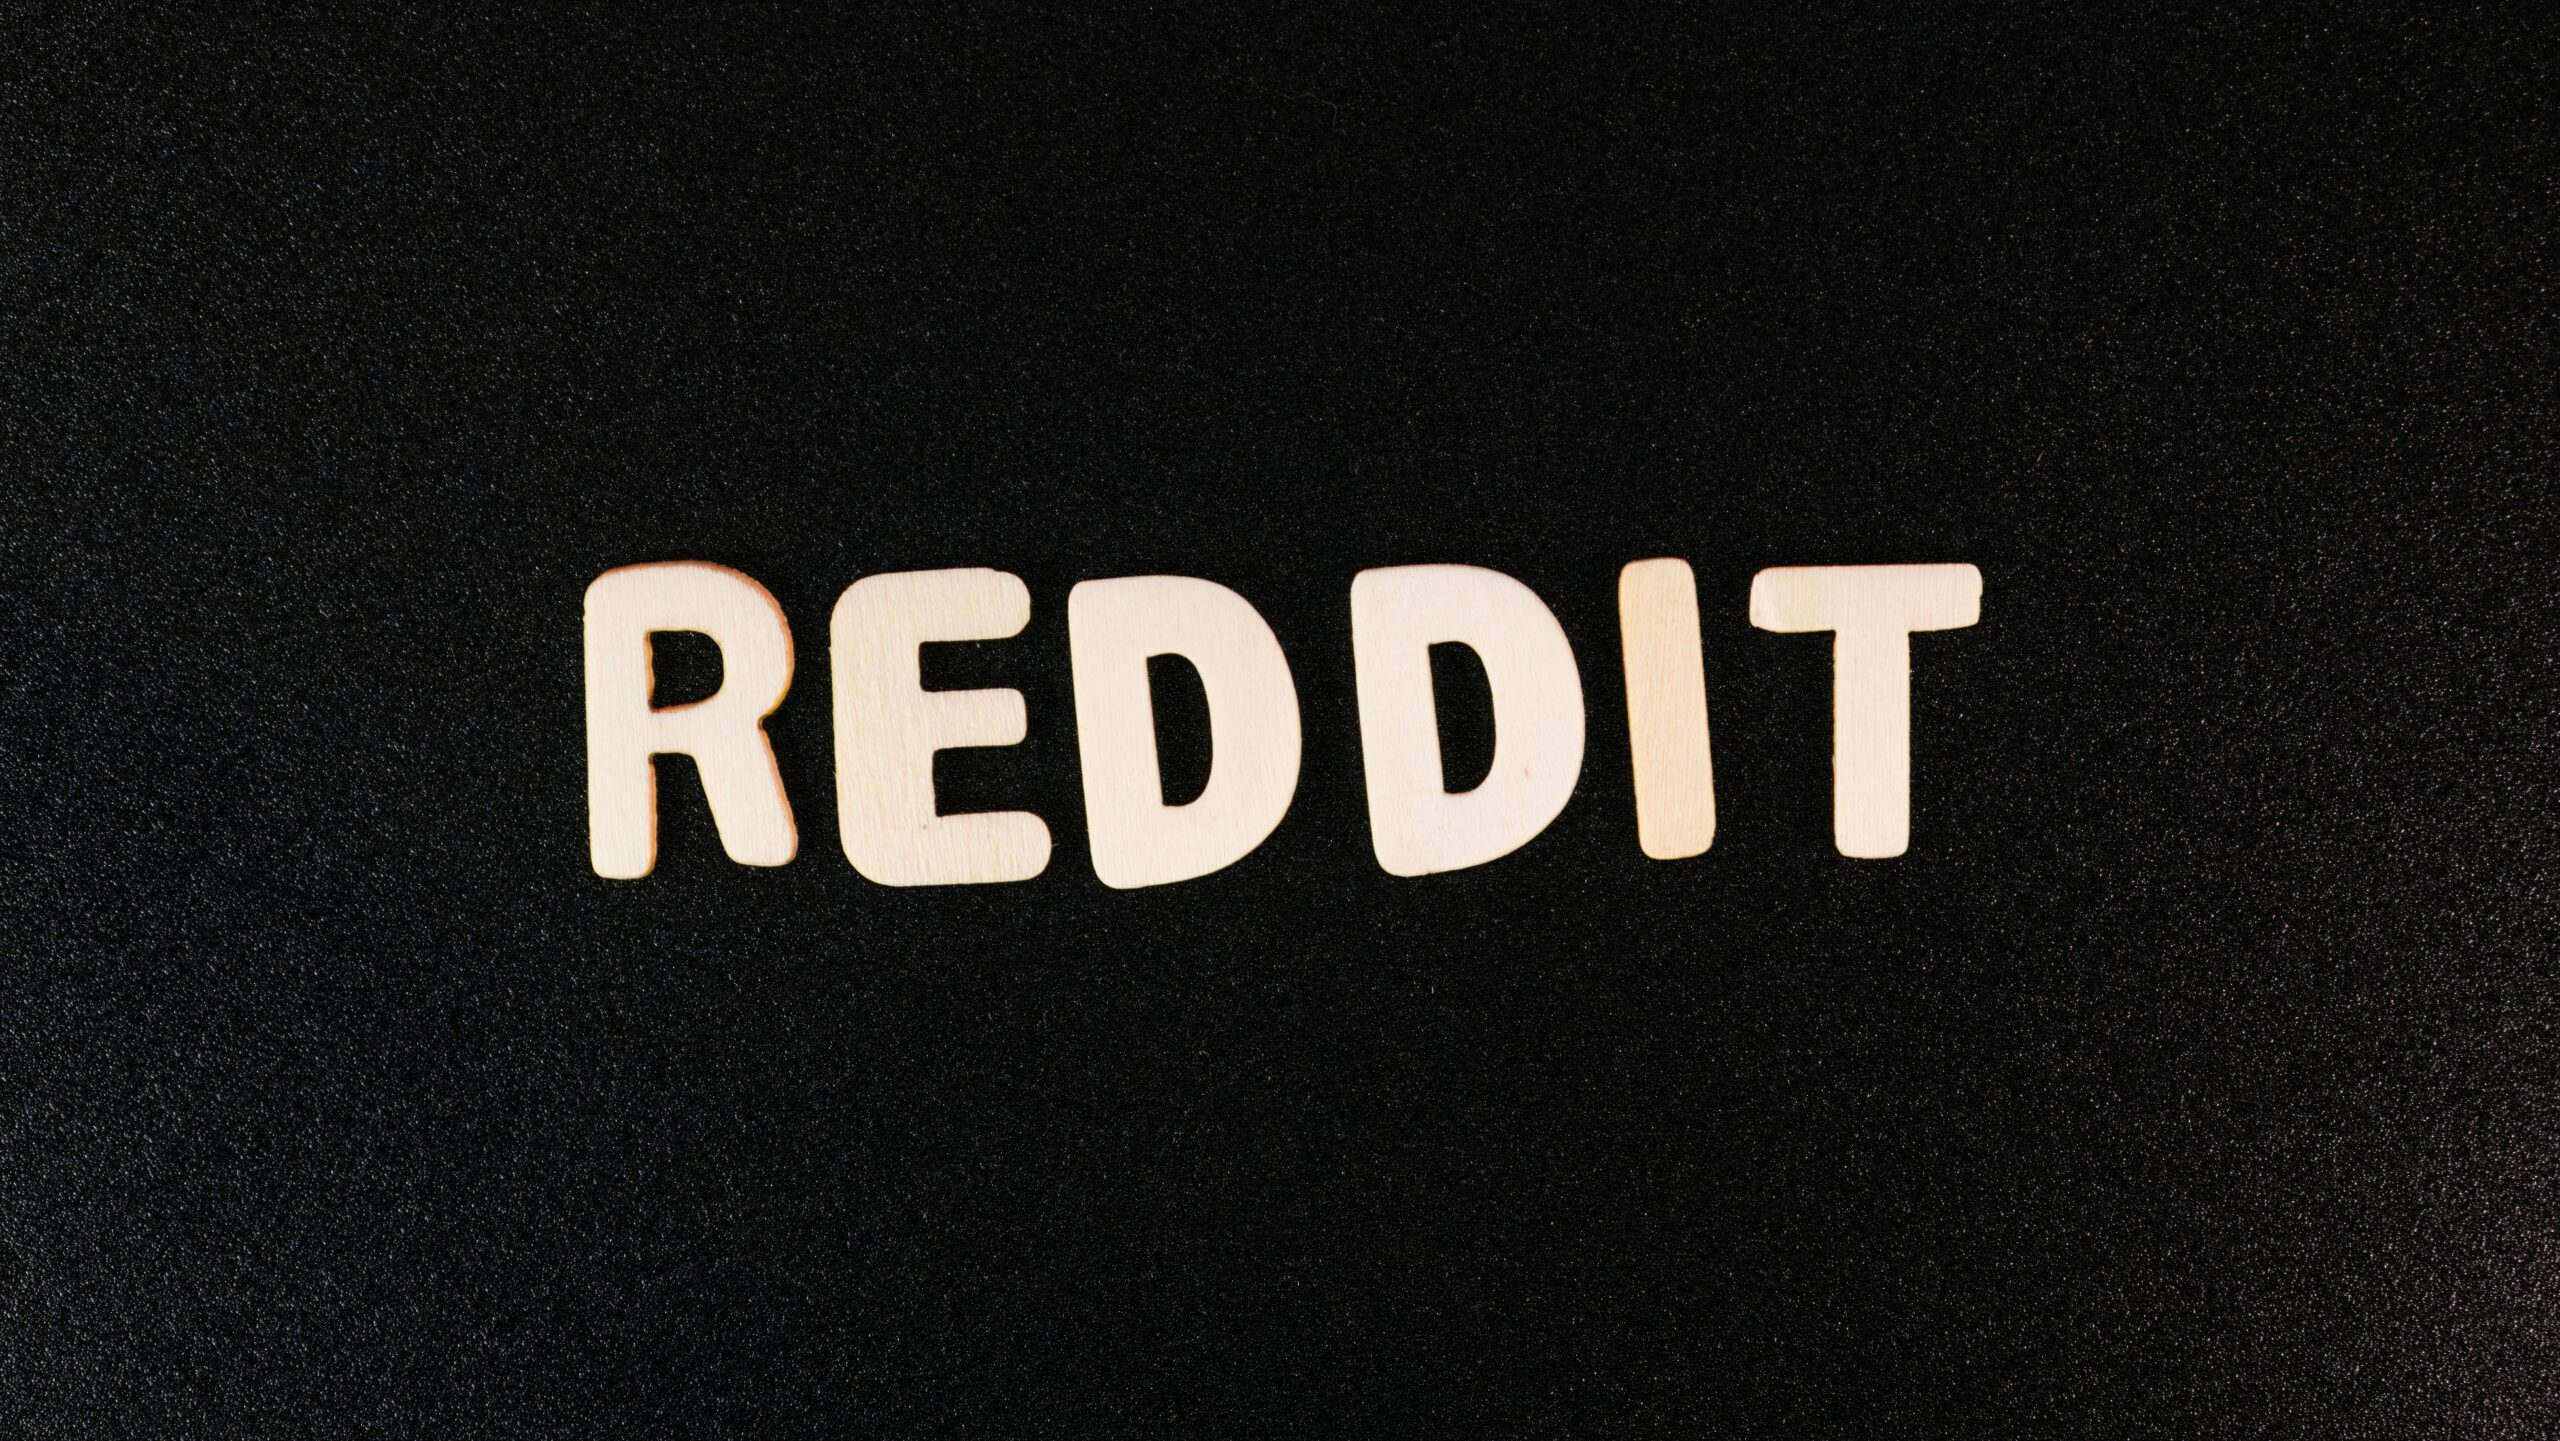 Google strikes $60 Million per year deal with Reddit to train its AI Model